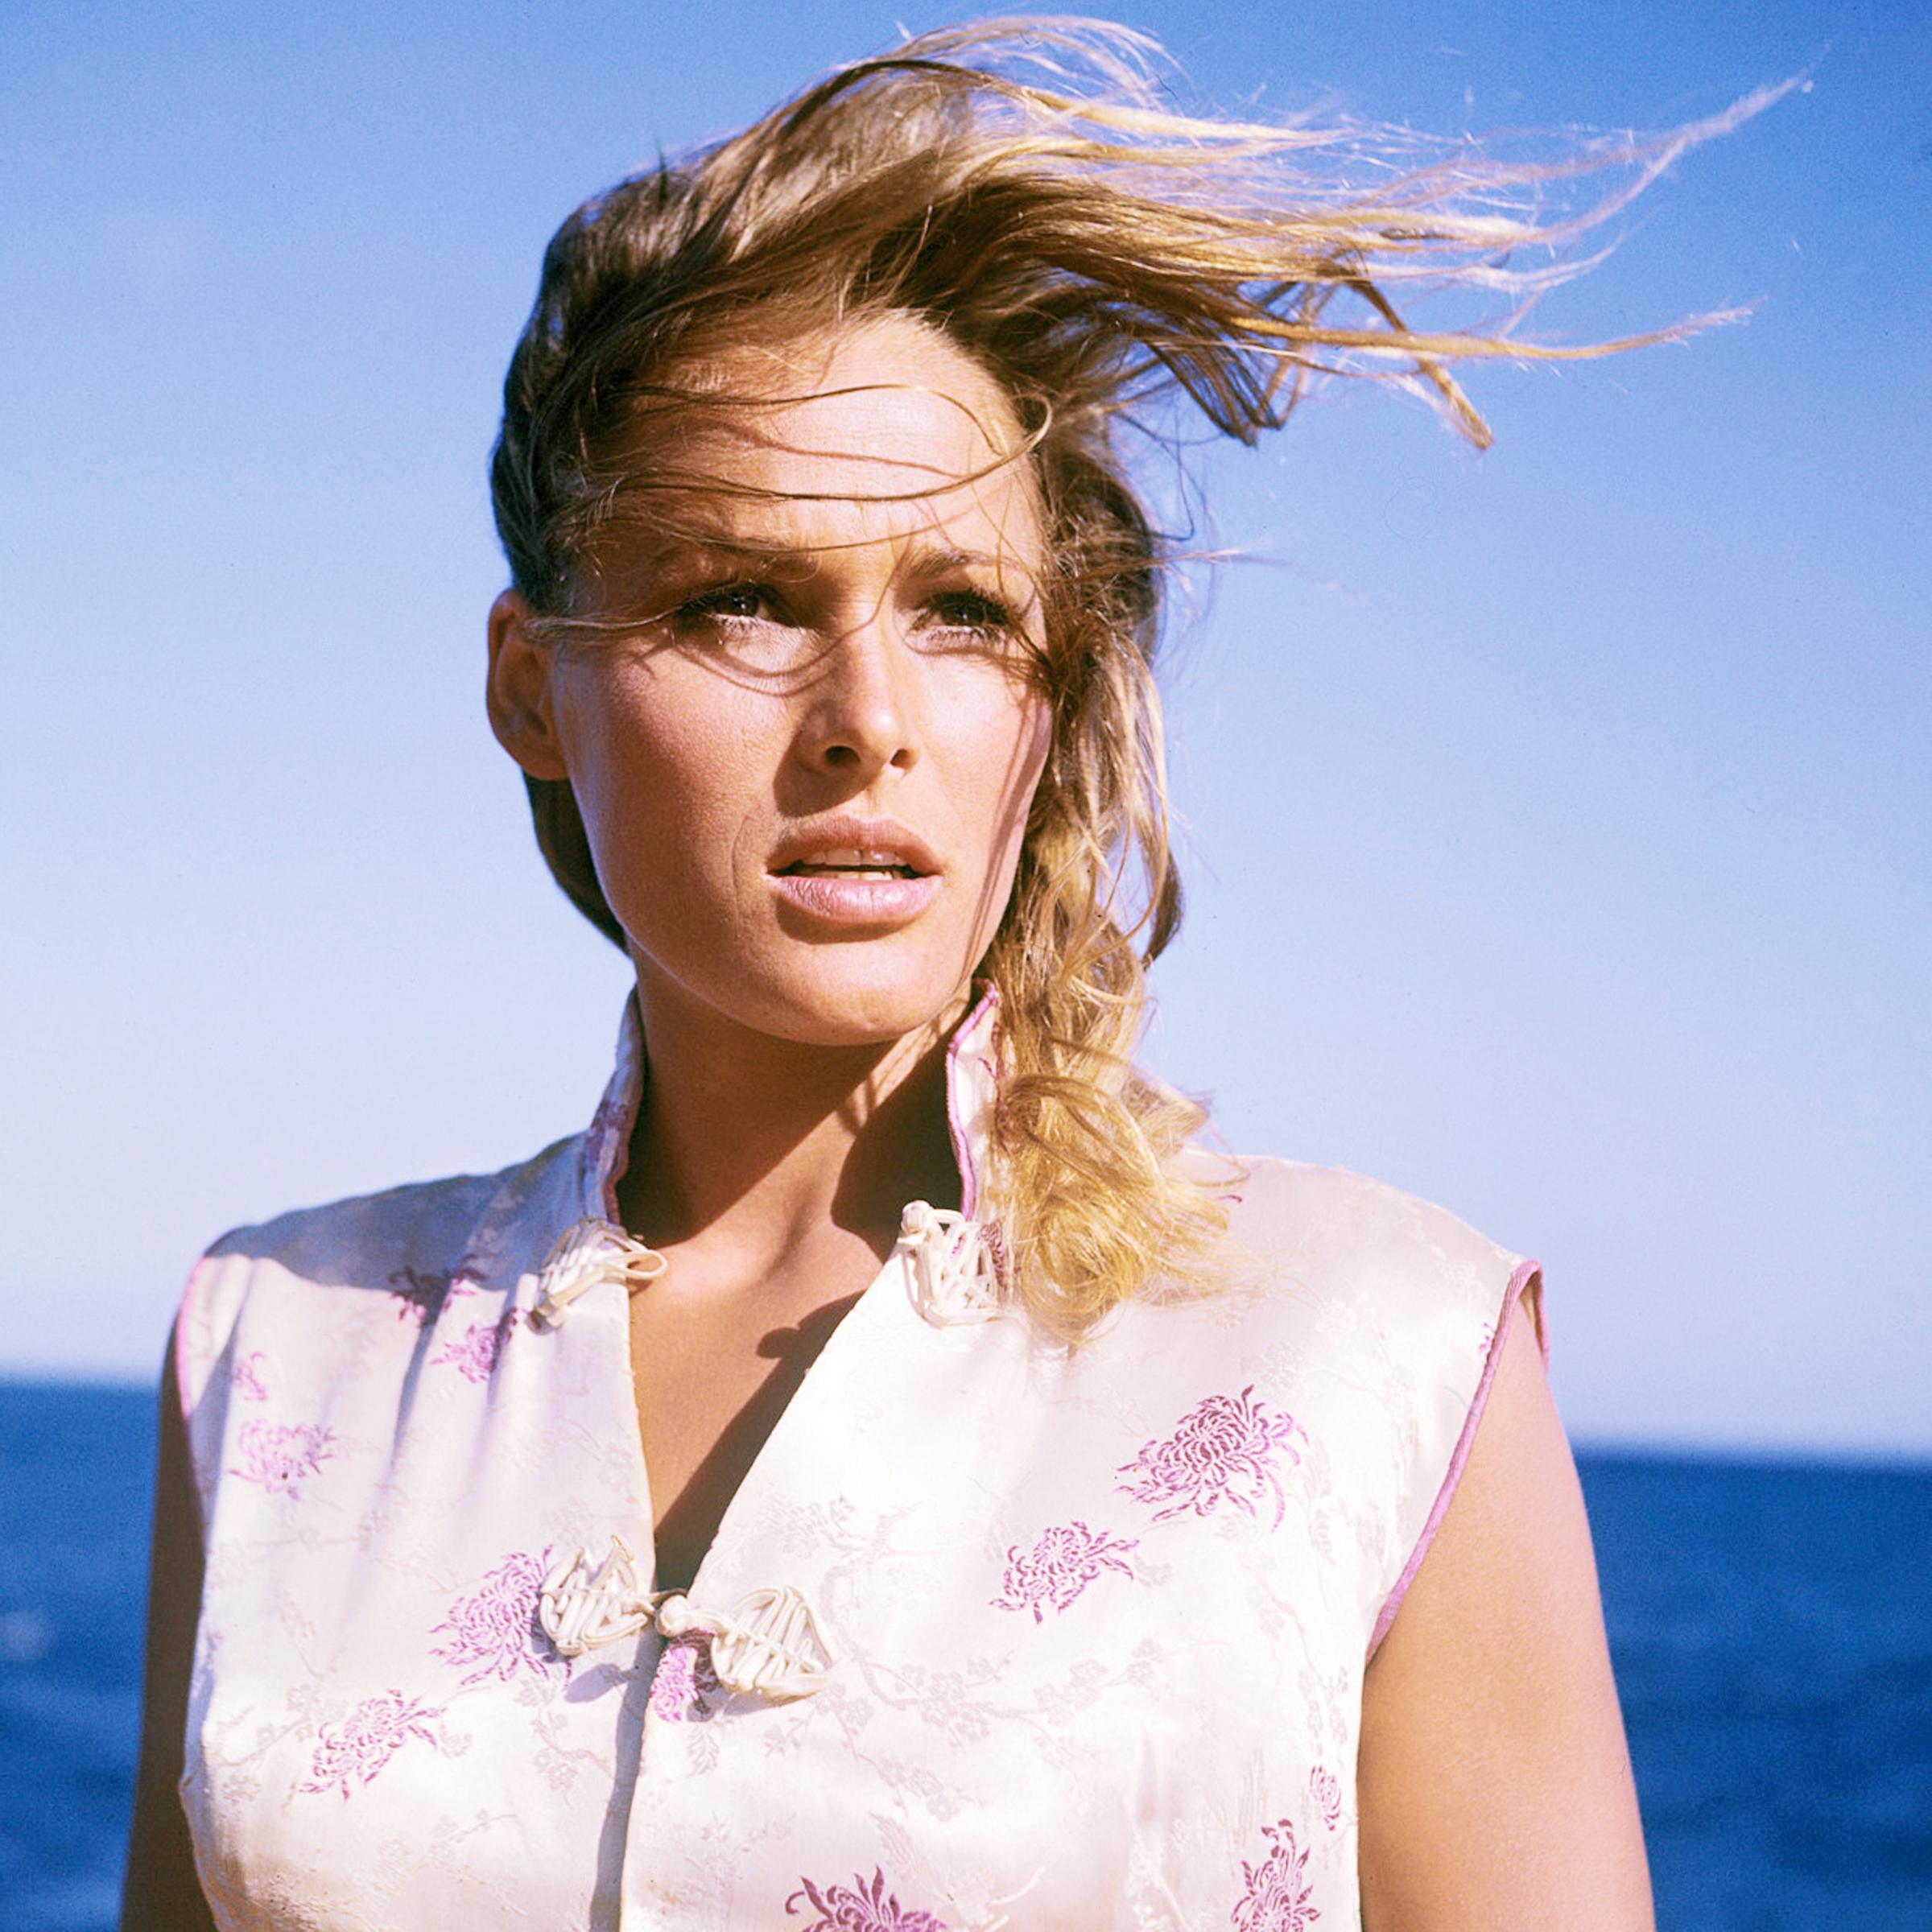 Ursula Andress as Honey Ryder in the James Bond film 'Dr. No,' in 1962. | Source: Getty Images